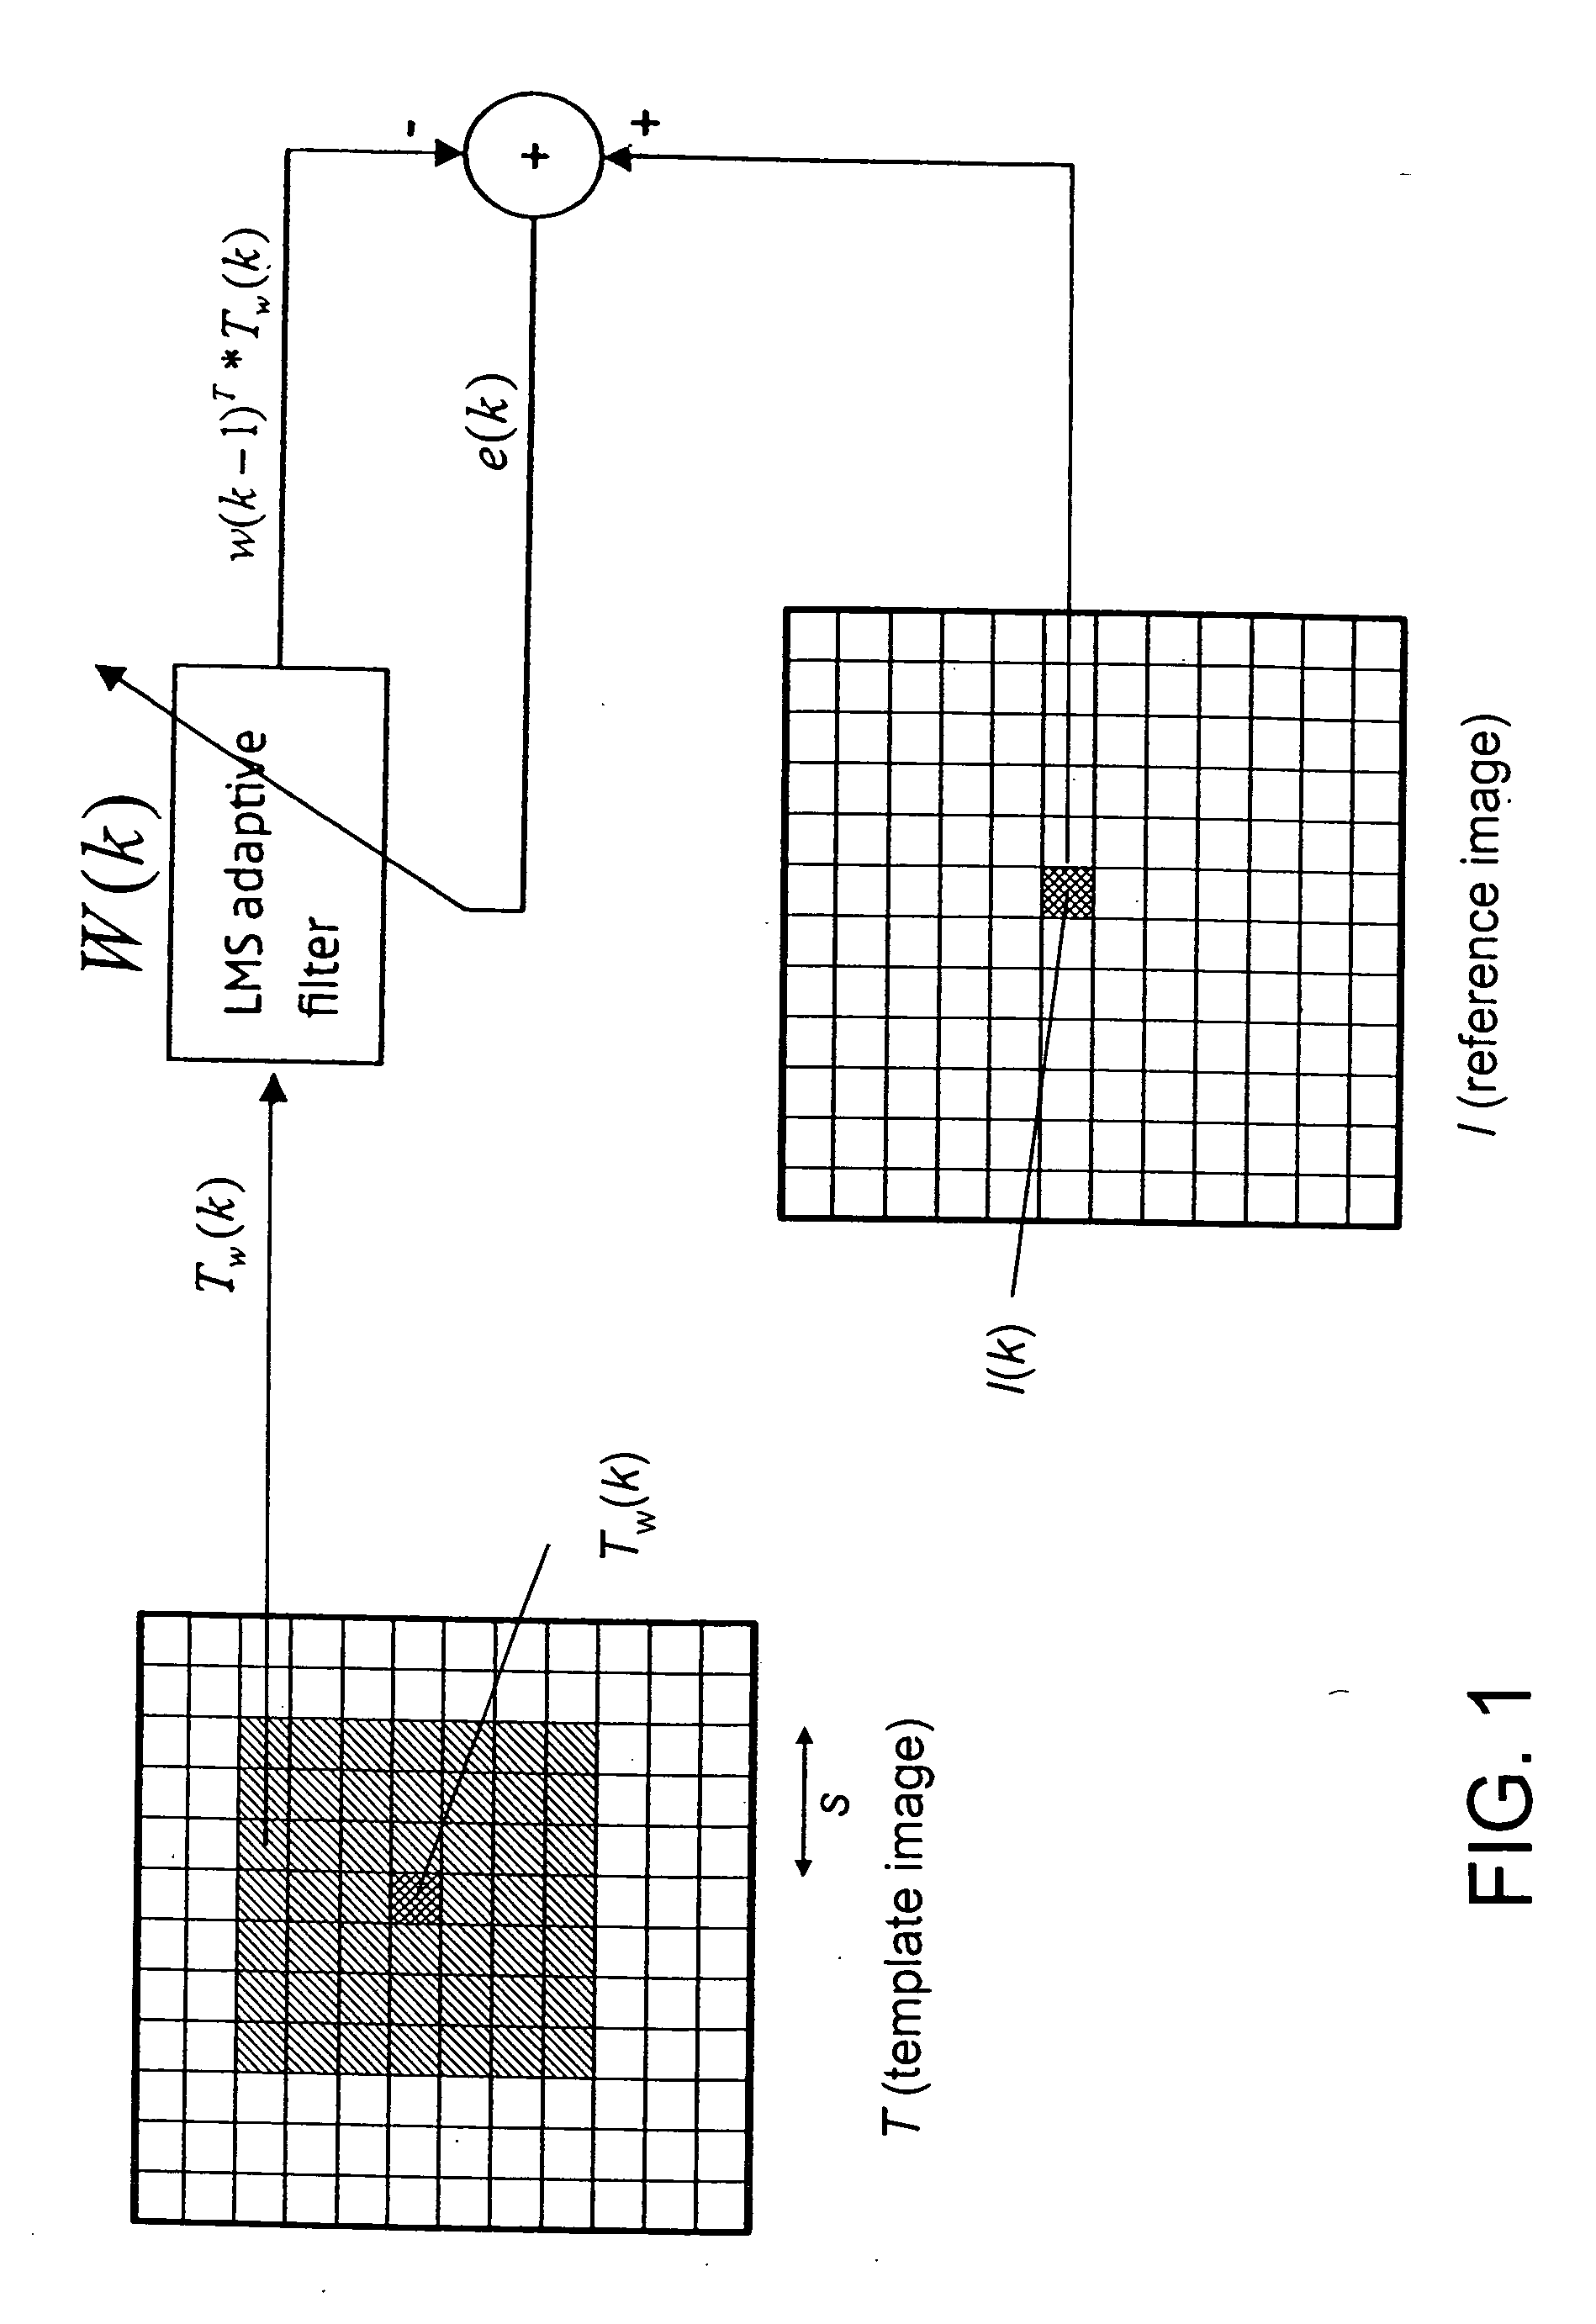 Method for optical flow field estimation using adaptive Filting